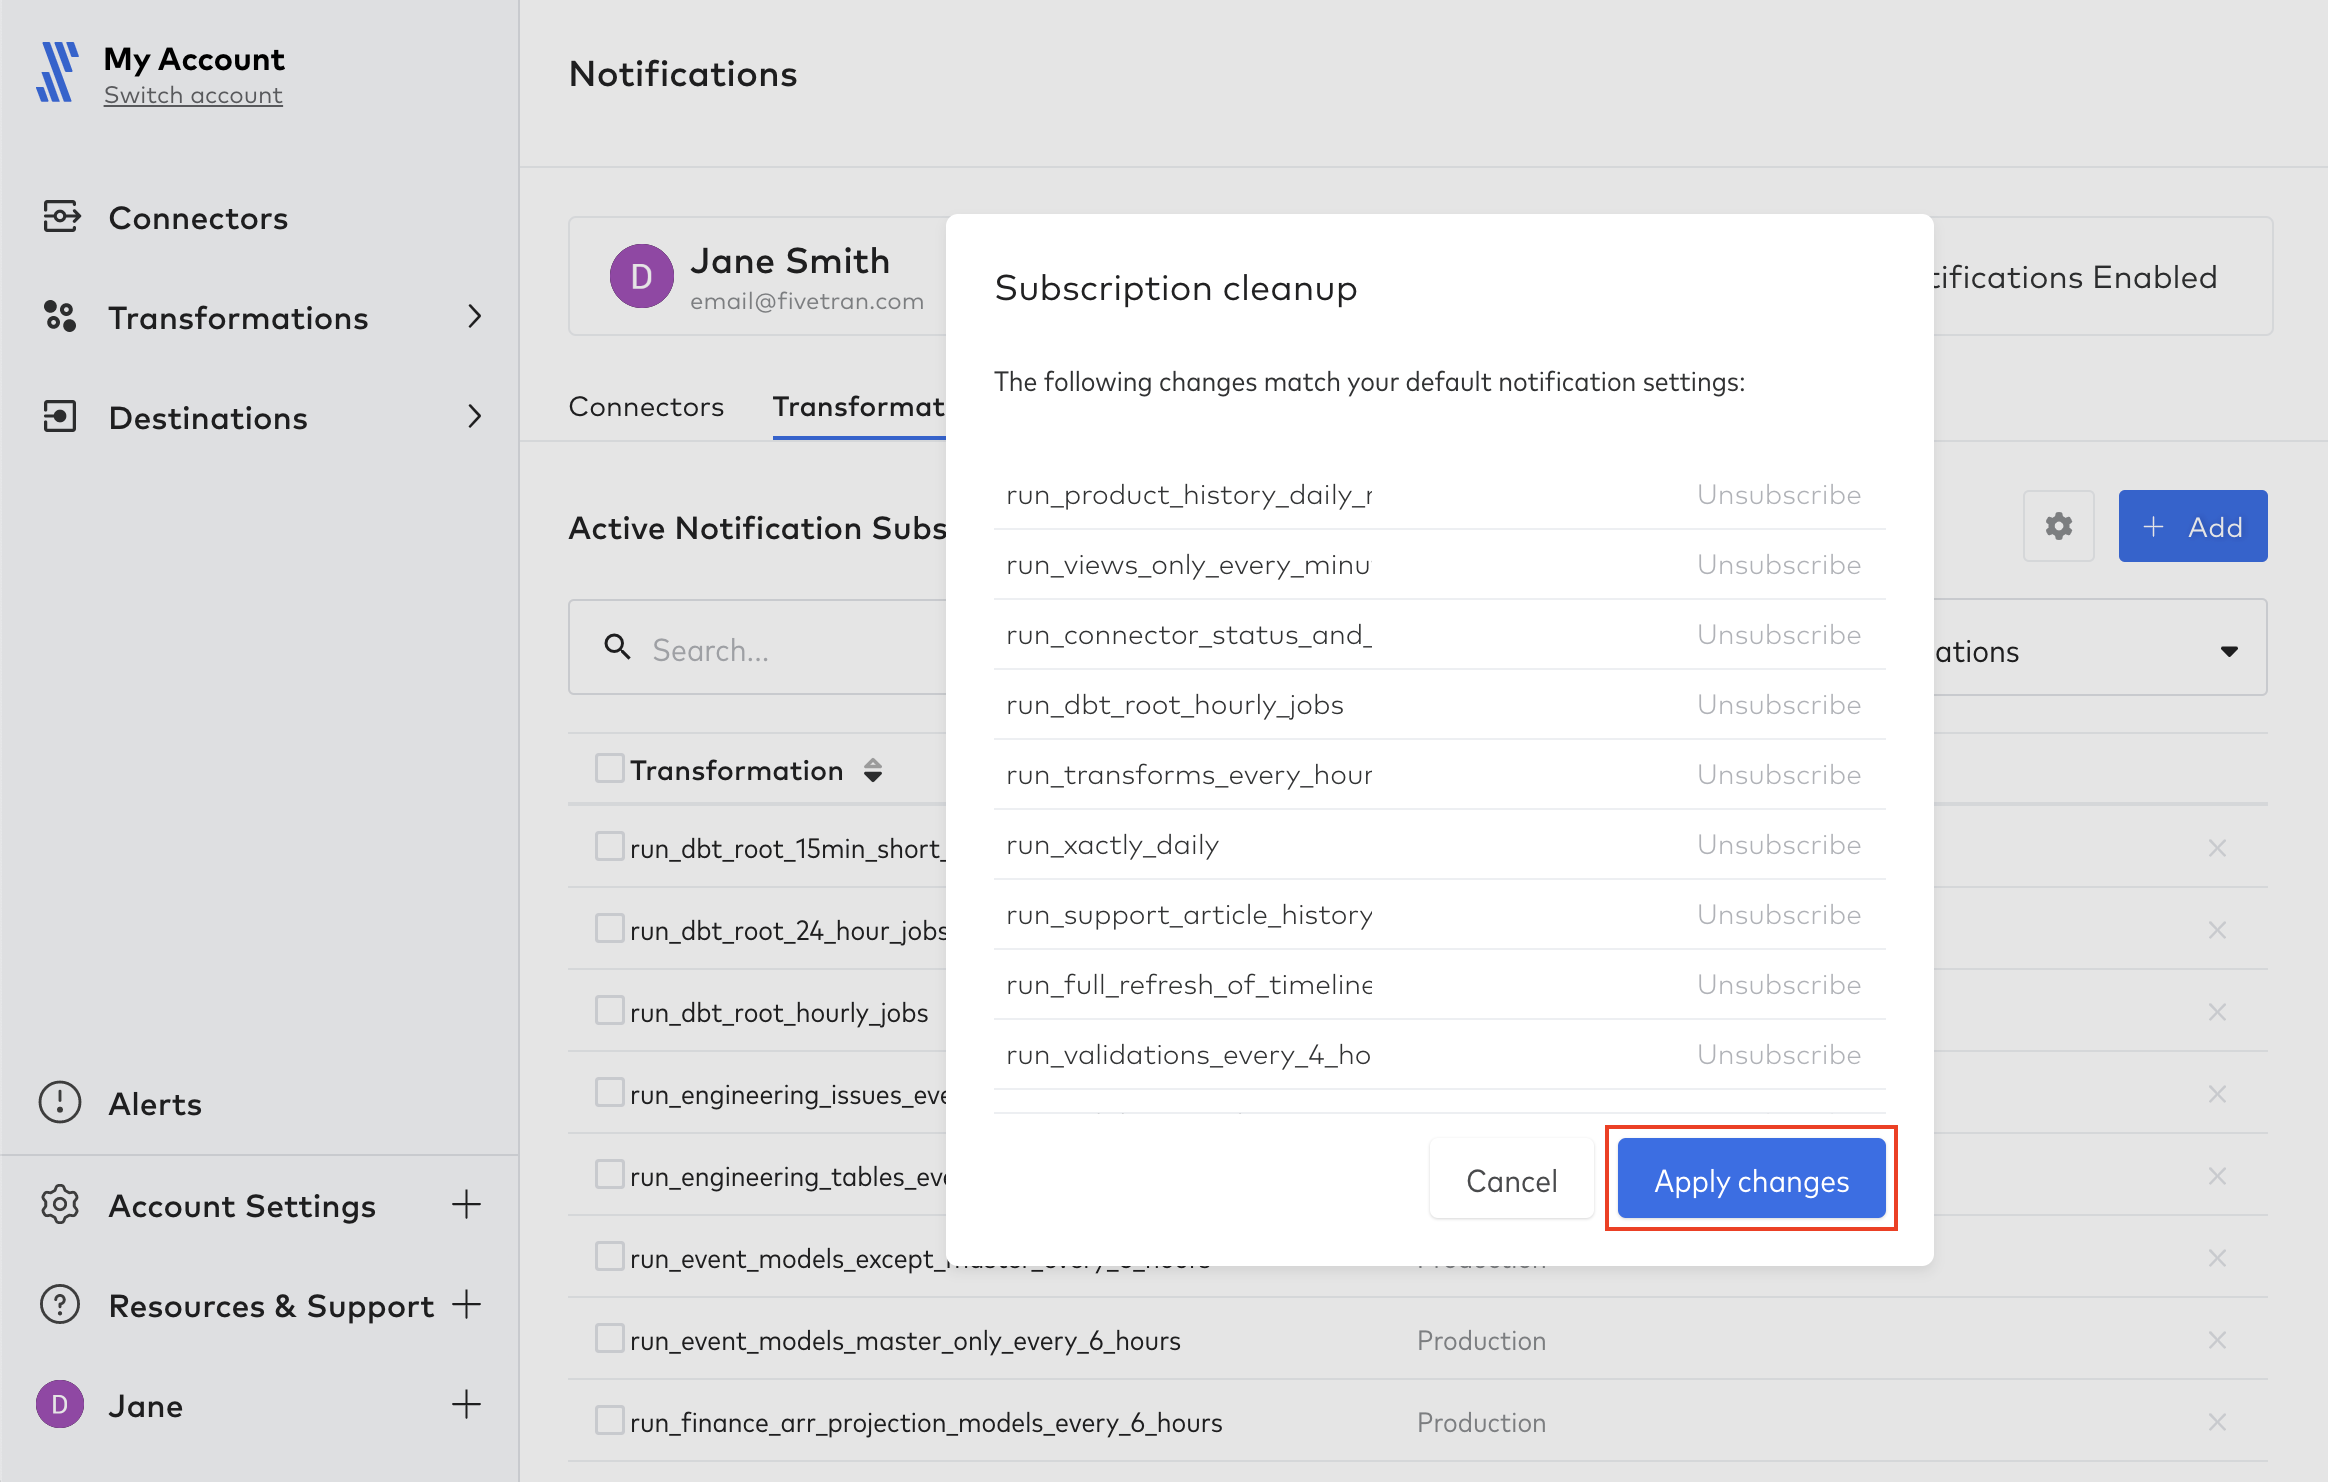 Clean up transformation subscriptions